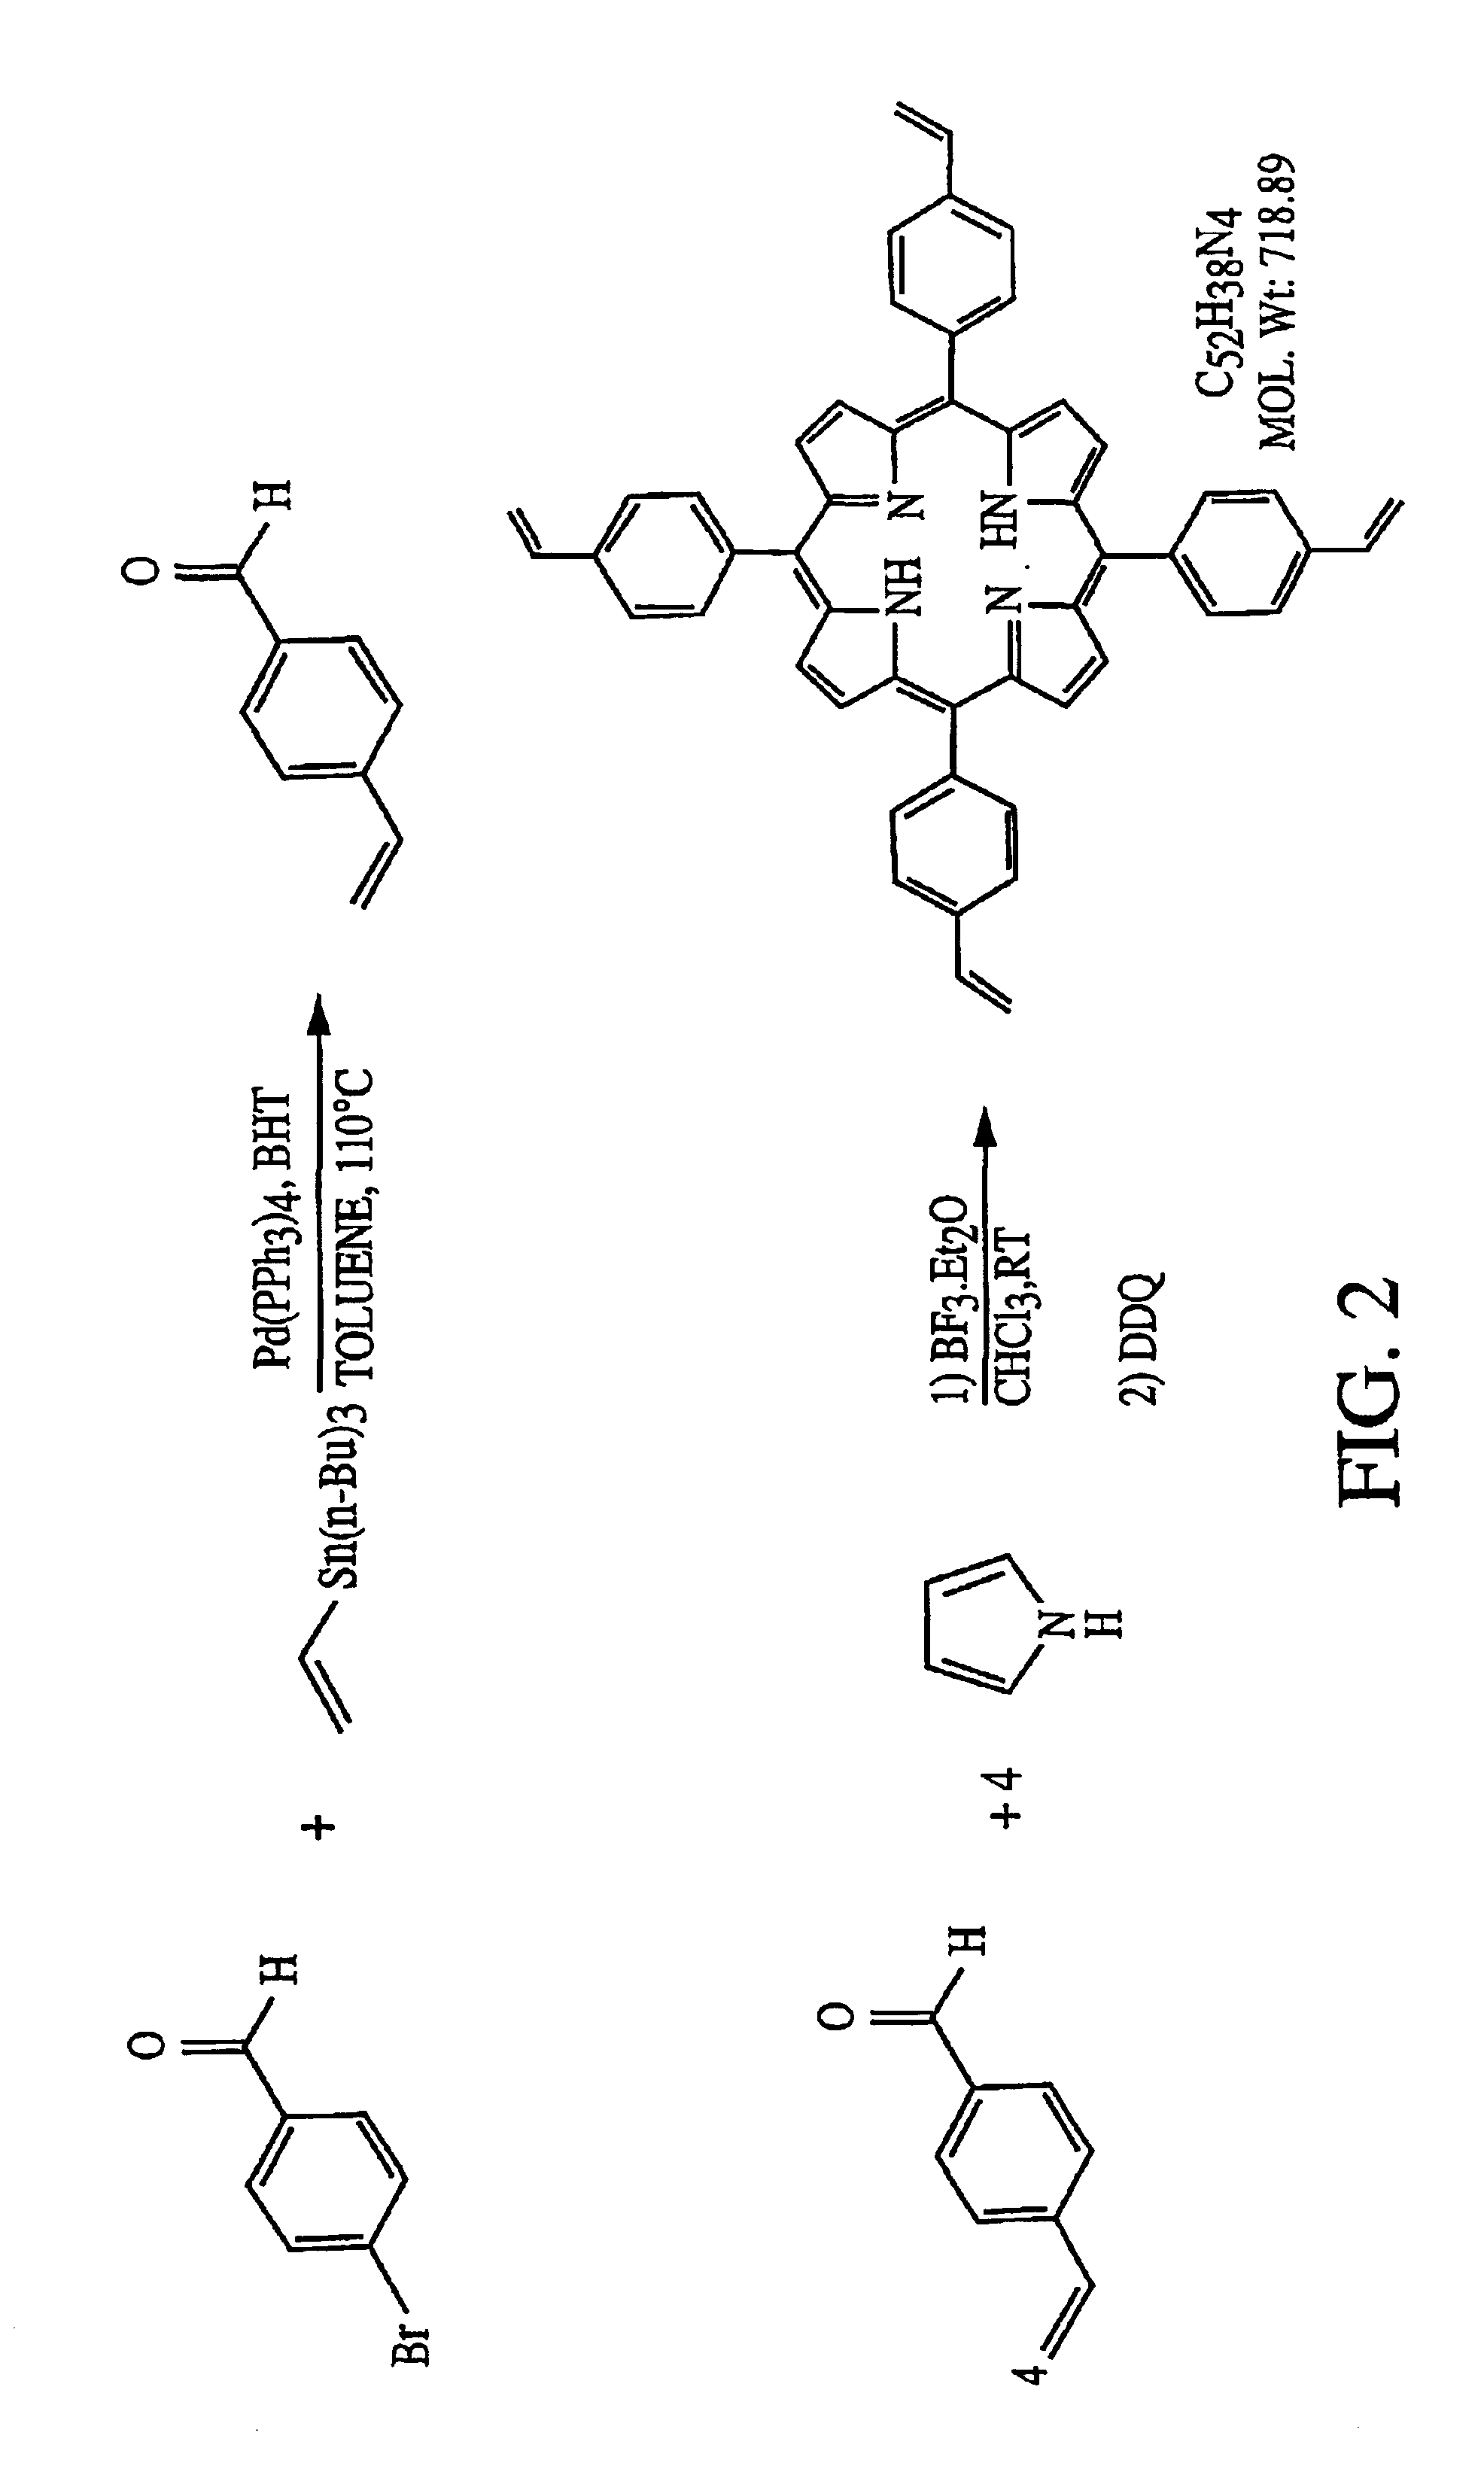 Molecularly imprinted polymeric sensor for the detection of explosives